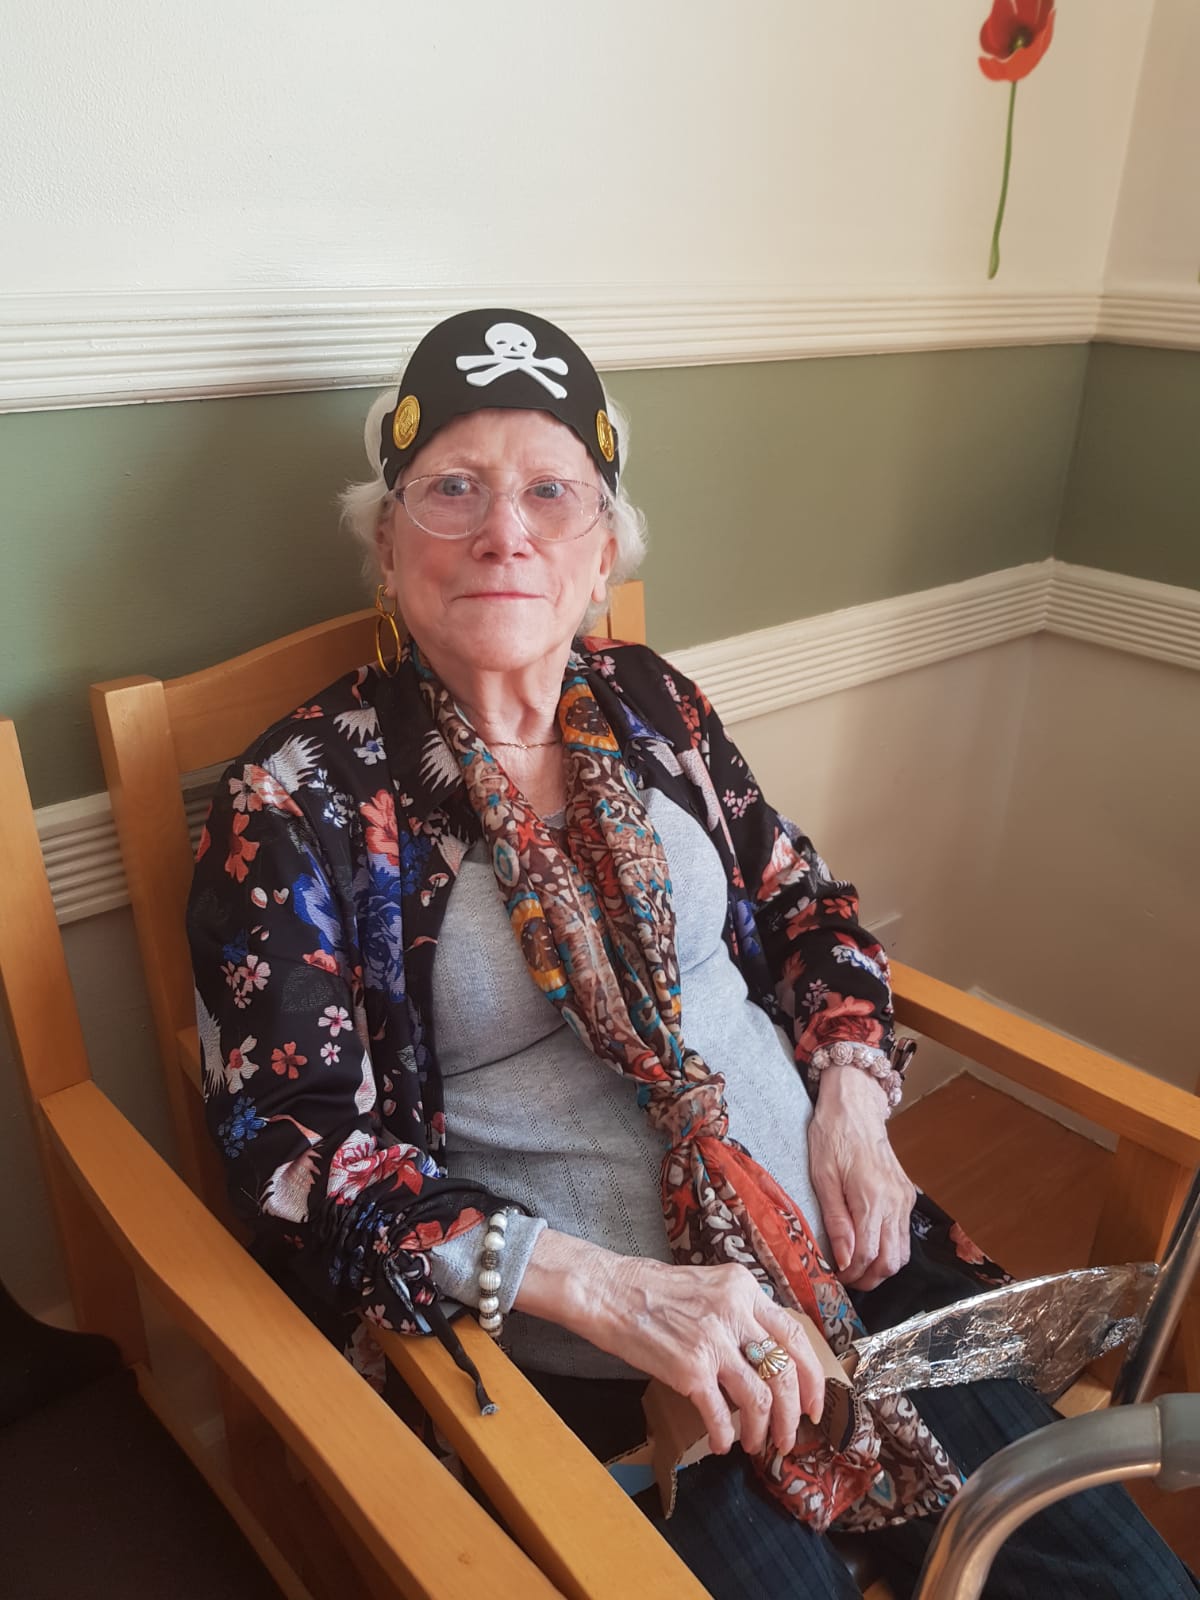 Elizabeth Court Pirate: Key Healthcare is dedicated to caring for elderly residents in safe. We have multiple dementia care homes including our care home middlesbrough, our care home St. Helen and care home saltburn. We excel in monitoring and improving care levels.